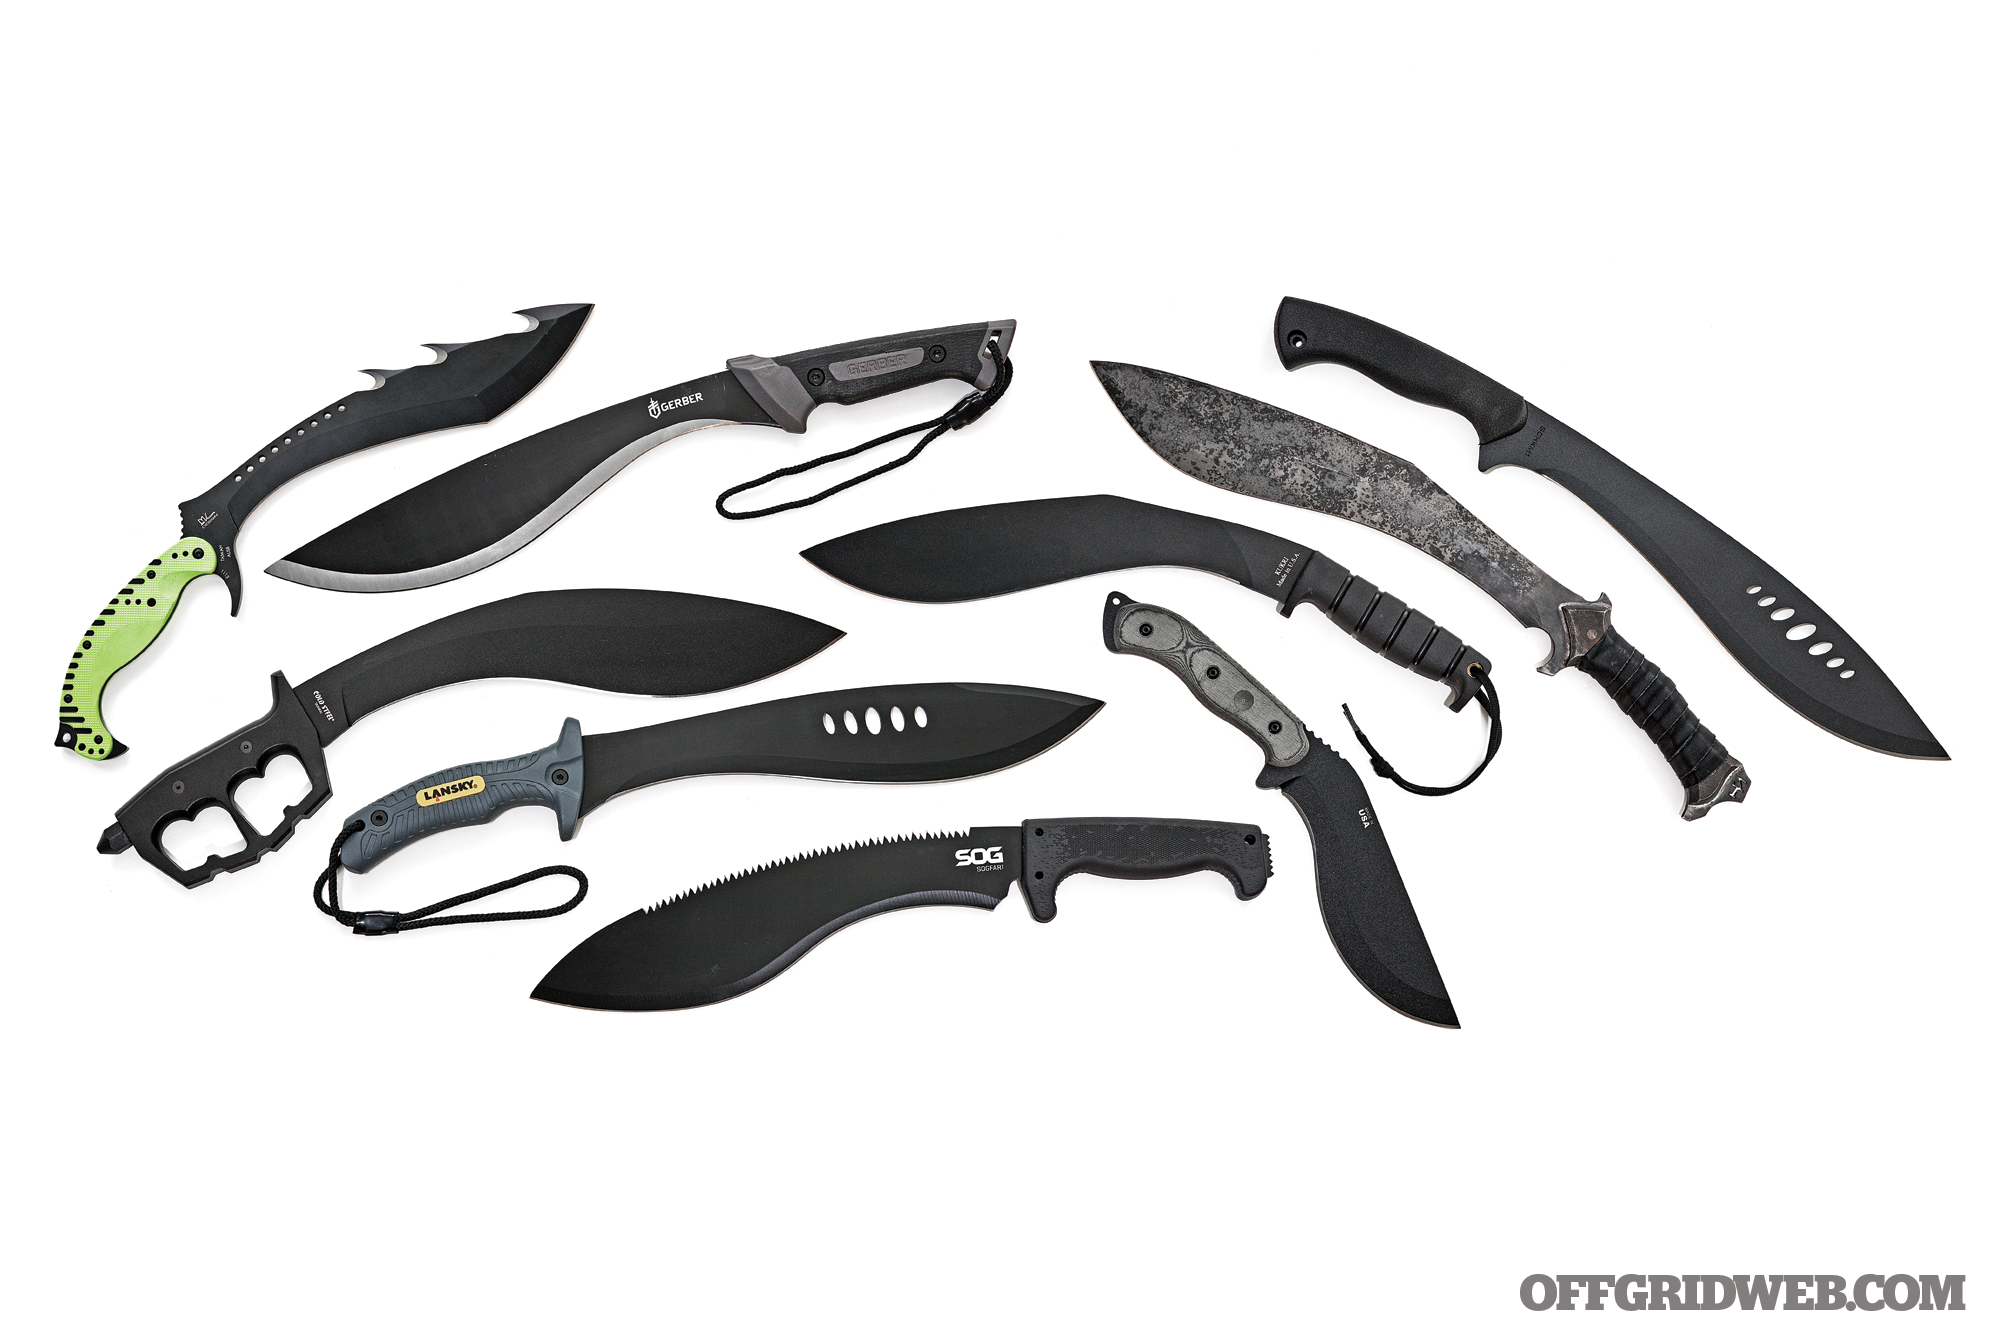 7 Of The Best Kukri Knife Options